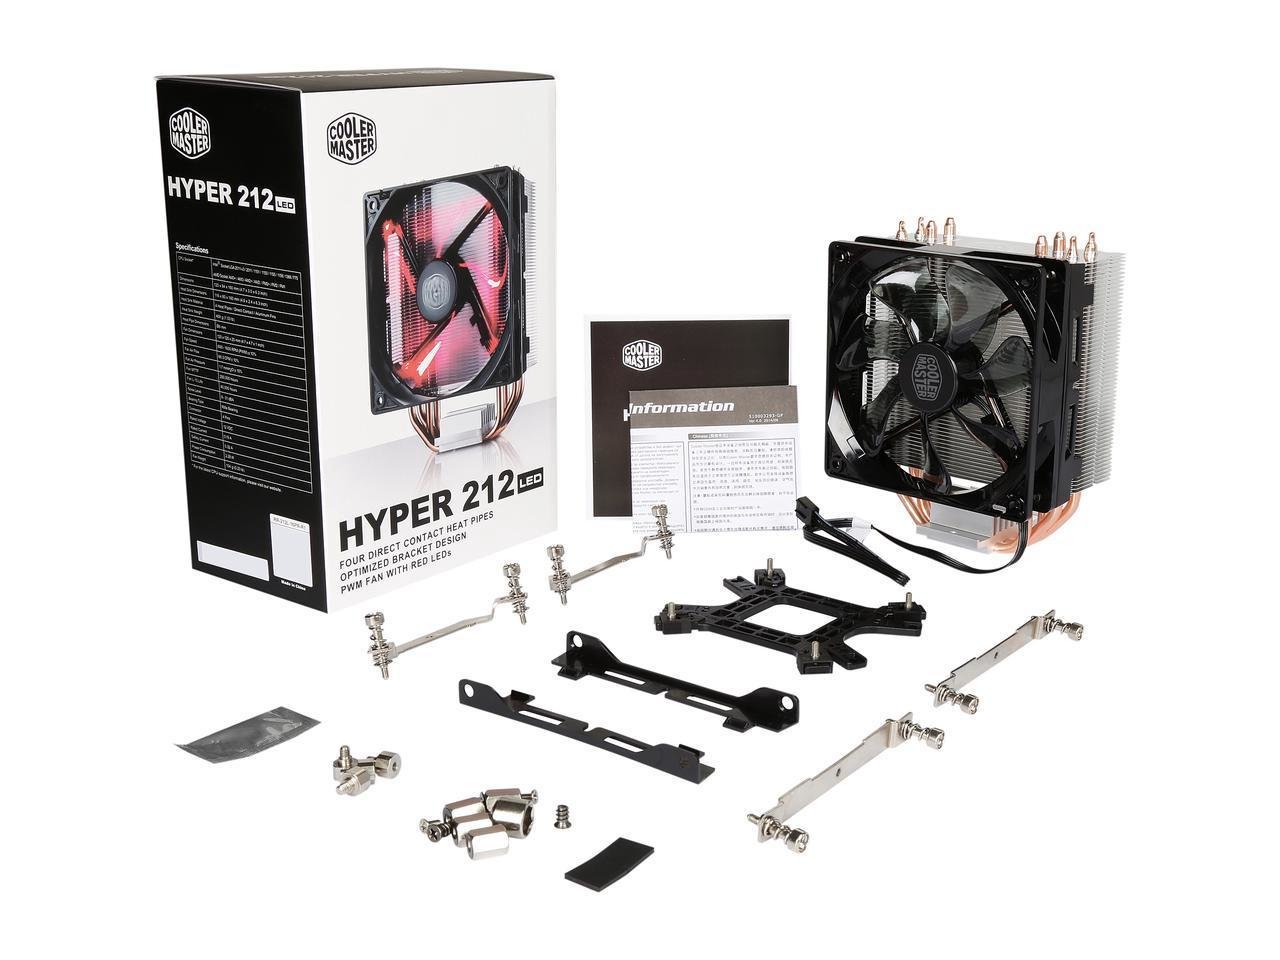 Hyper 212 LED with PWM Fan, Four Direct Contact